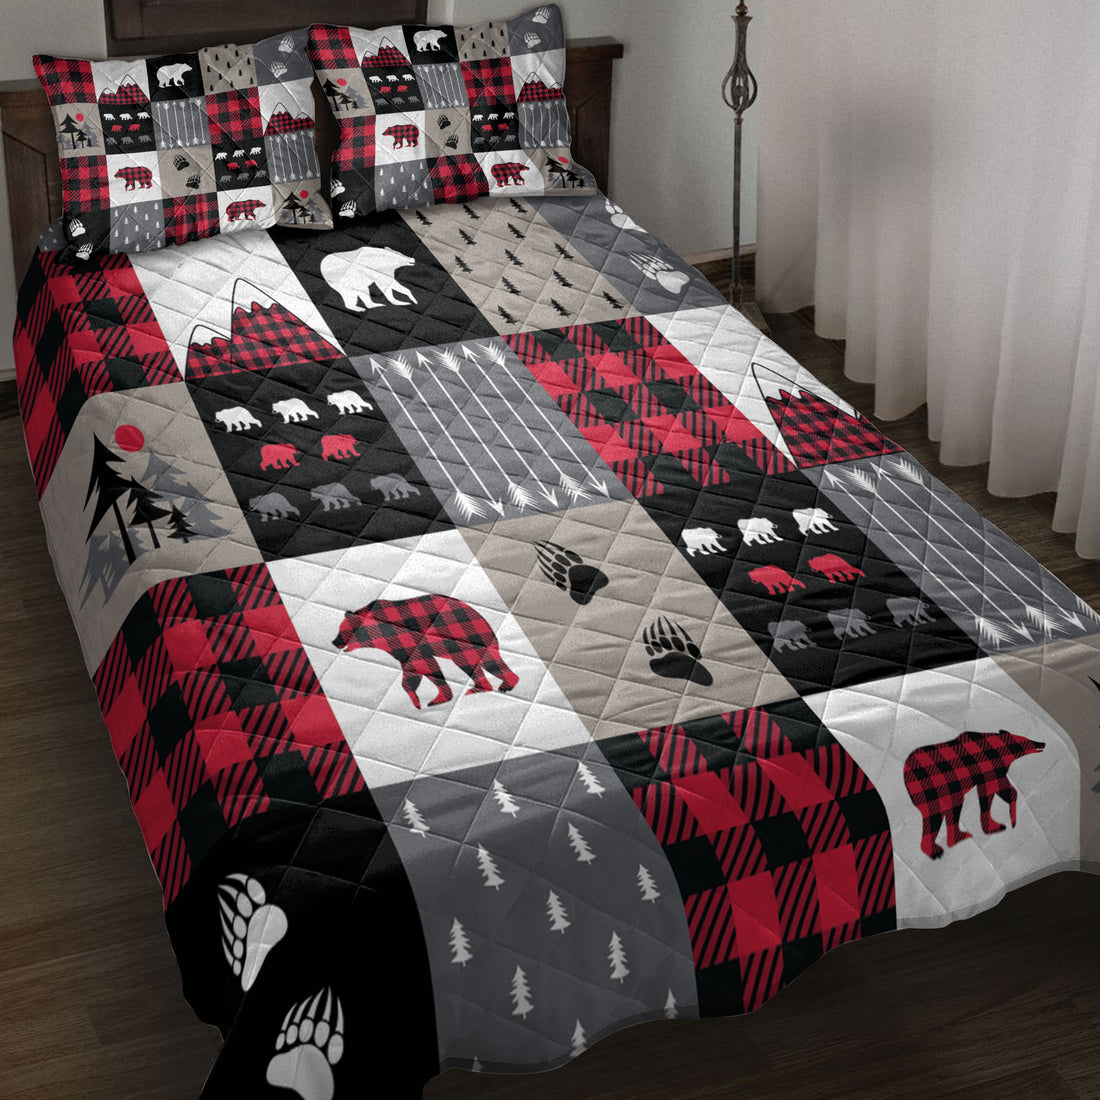 Ohaprints-Quilt-Bed-Set-Pillowcase-Cabin-Bear-Country-Patchwork-Bears-Mountains-Bear-Tracks-Arrows-Tree-Blanket-Bedspread-Bedding-4171-Throw (55'' x 60'')